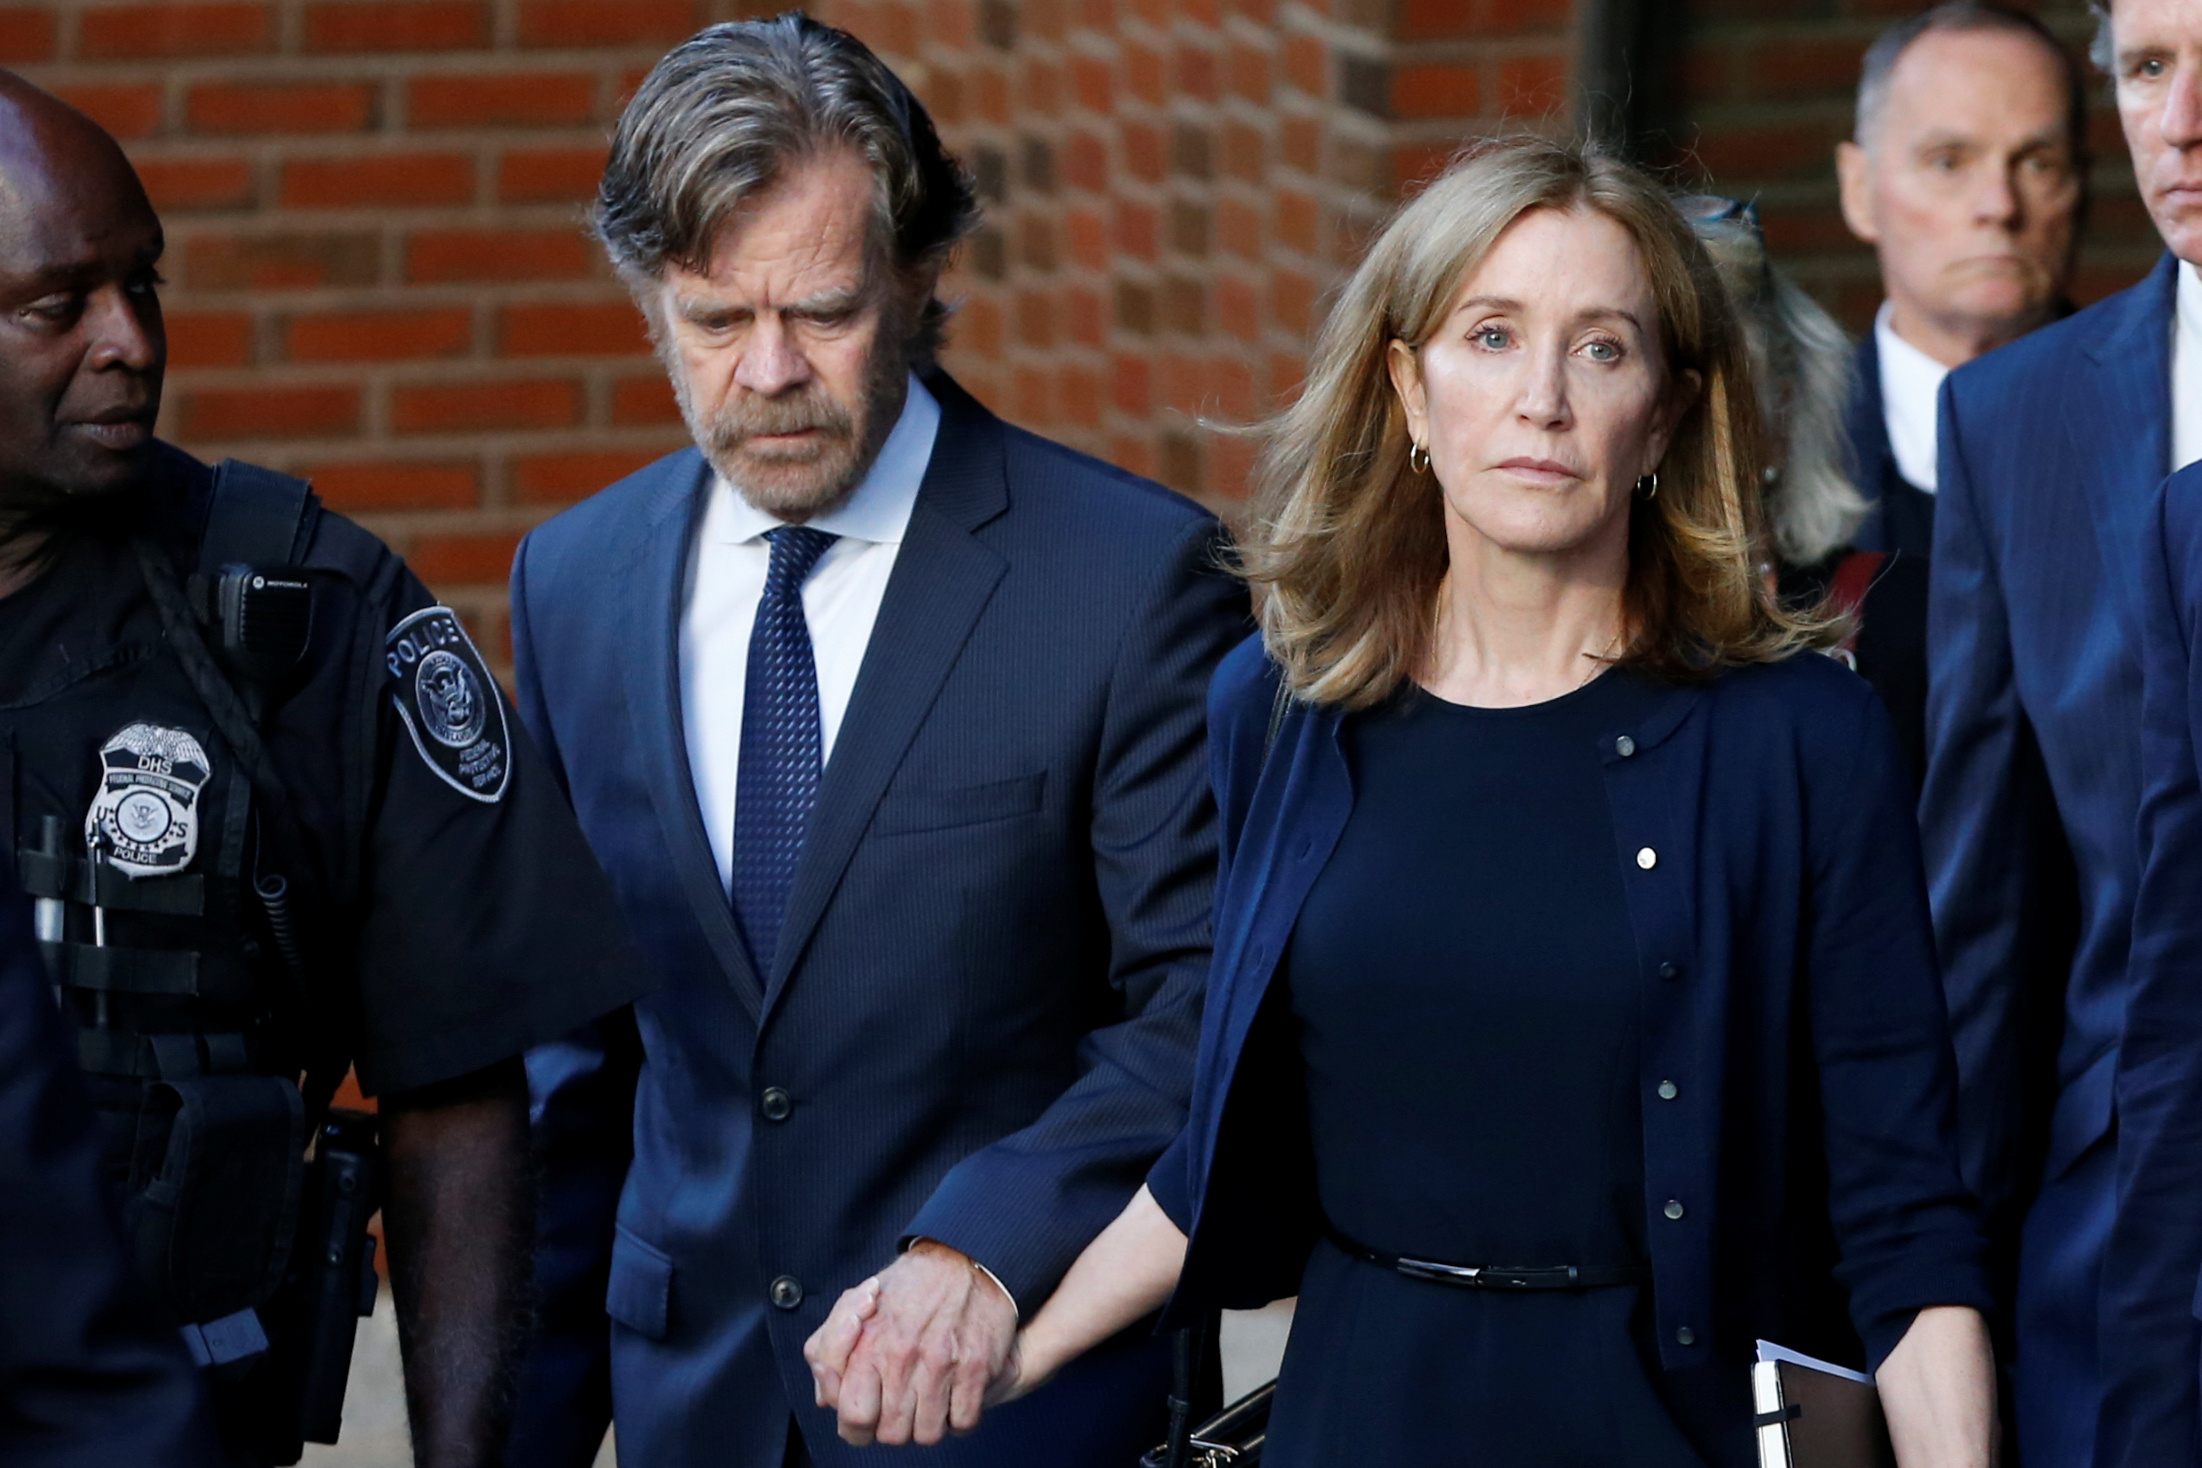 Felicity Huffman sentenced to 14 days in prison for Varsity Blues college scam